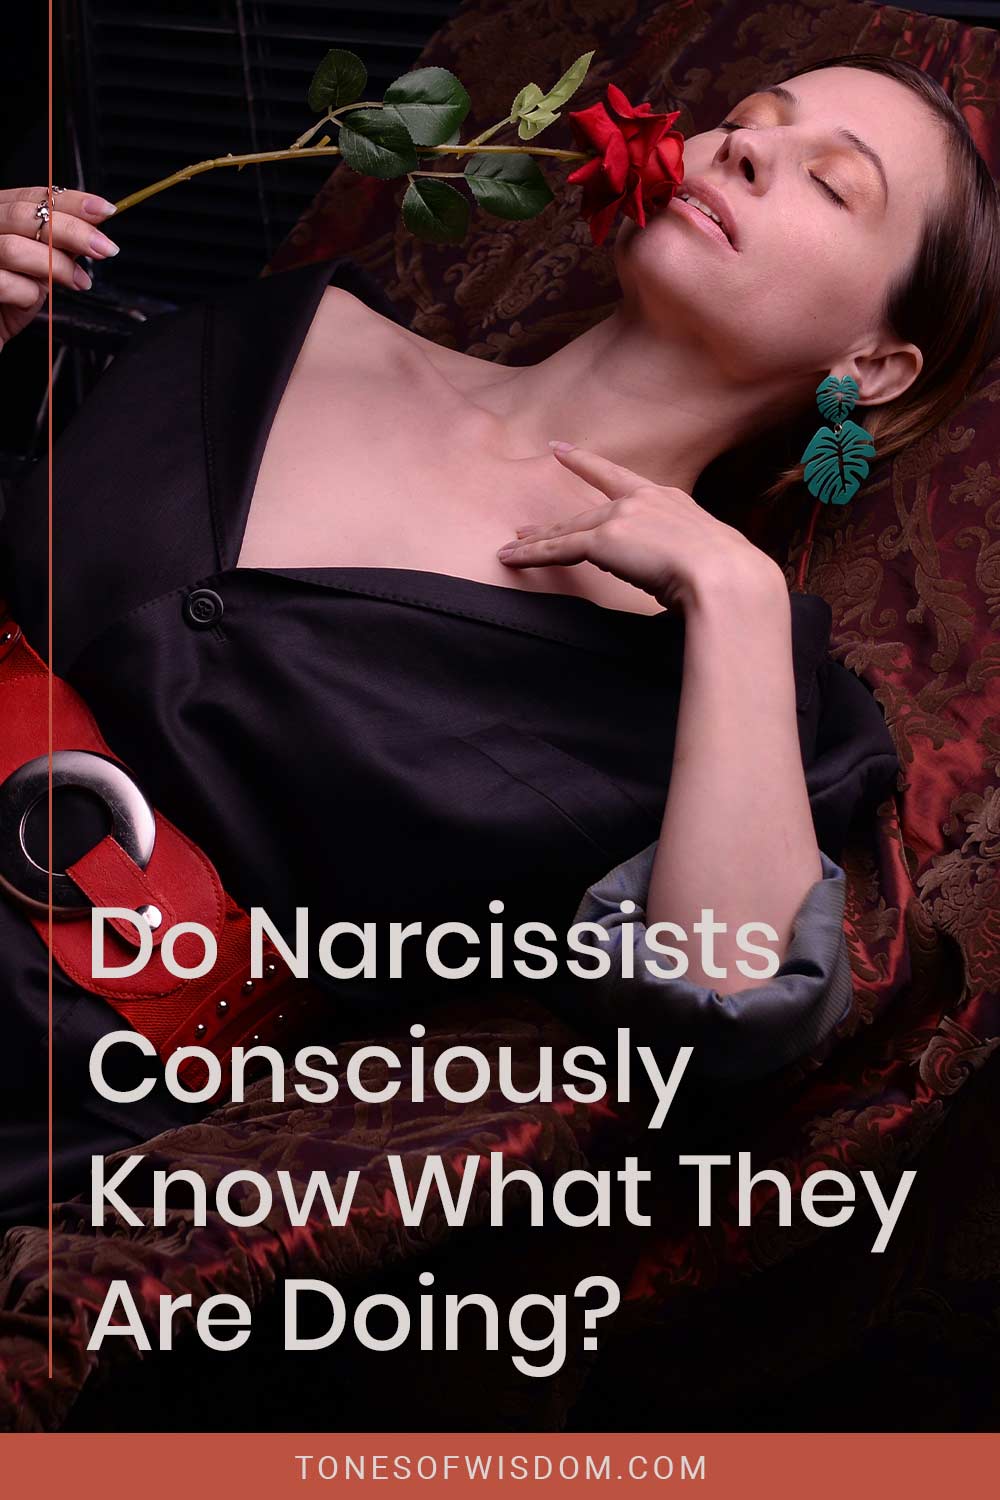 Do Narcissists Consciously Know What They Are Doing?